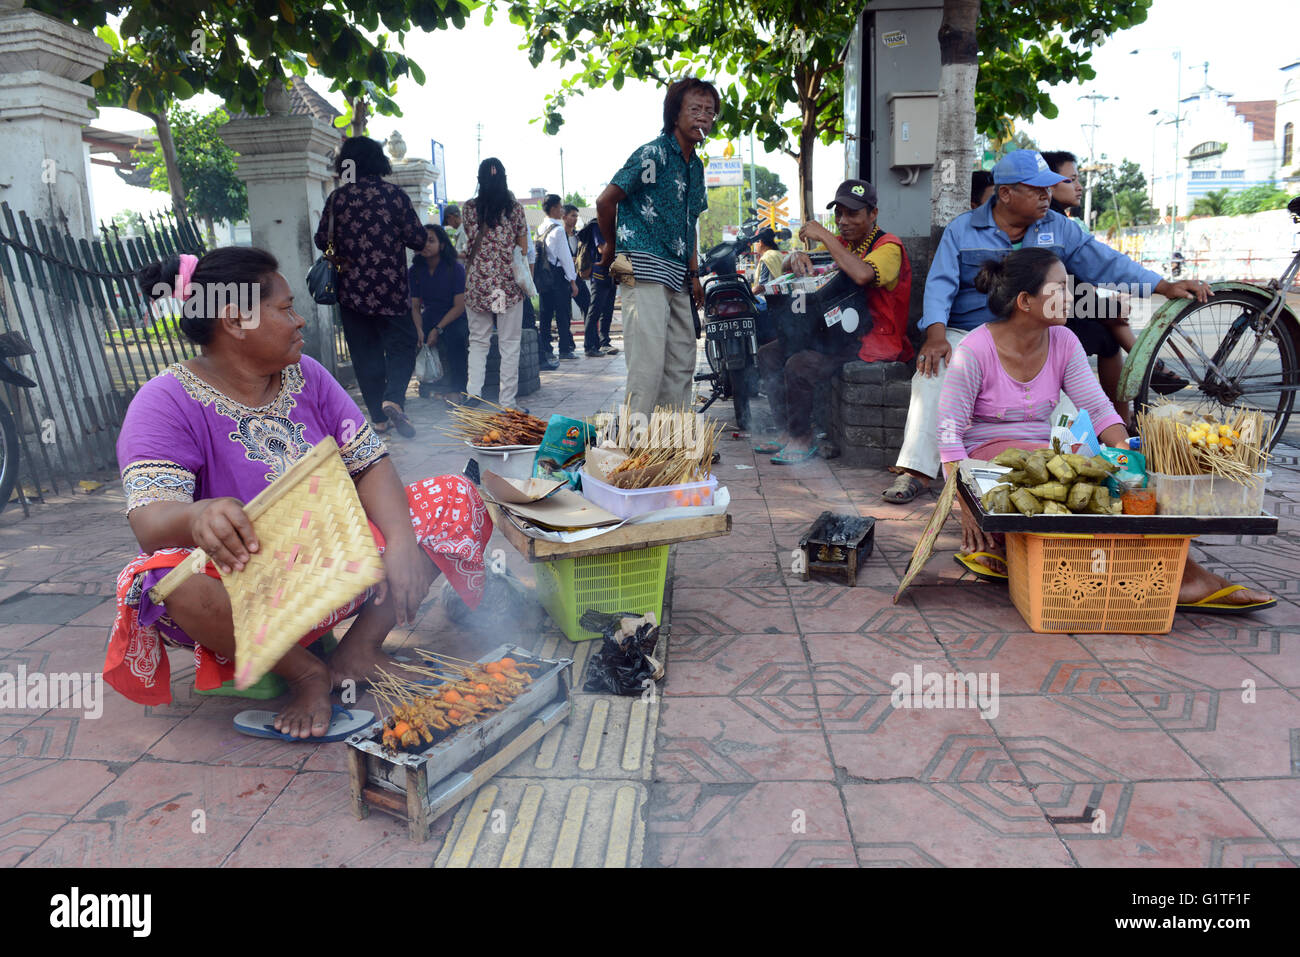 Chicken Satay ( ayam sate ) is a signature street food dish in Indonesia. Stock Photo